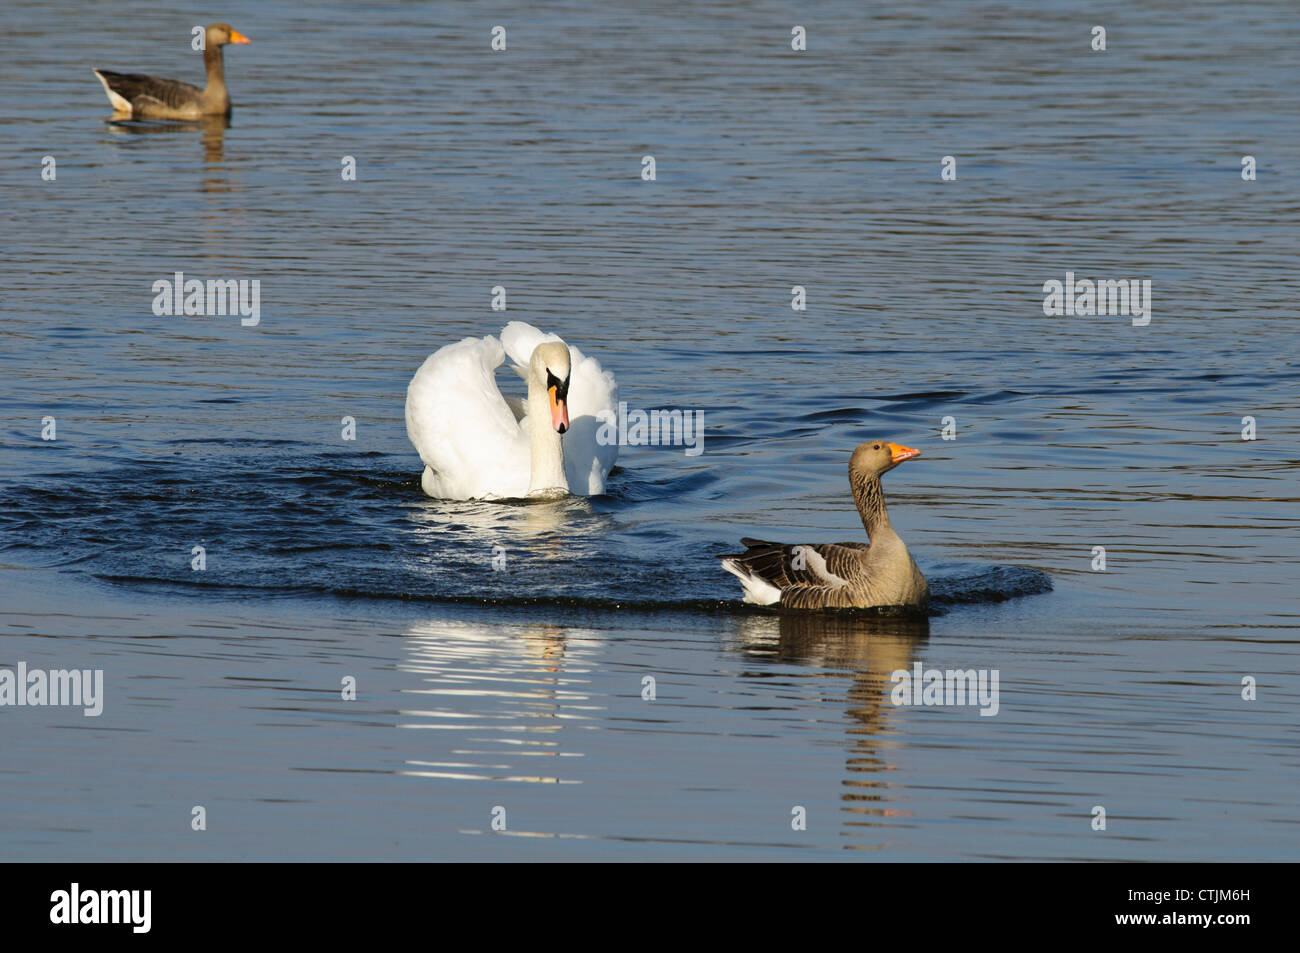 A greylag goose (Anser anser) being chased by a mute swan (Cygnus olor) with its wings held in an aggressive posture. Stock Photo